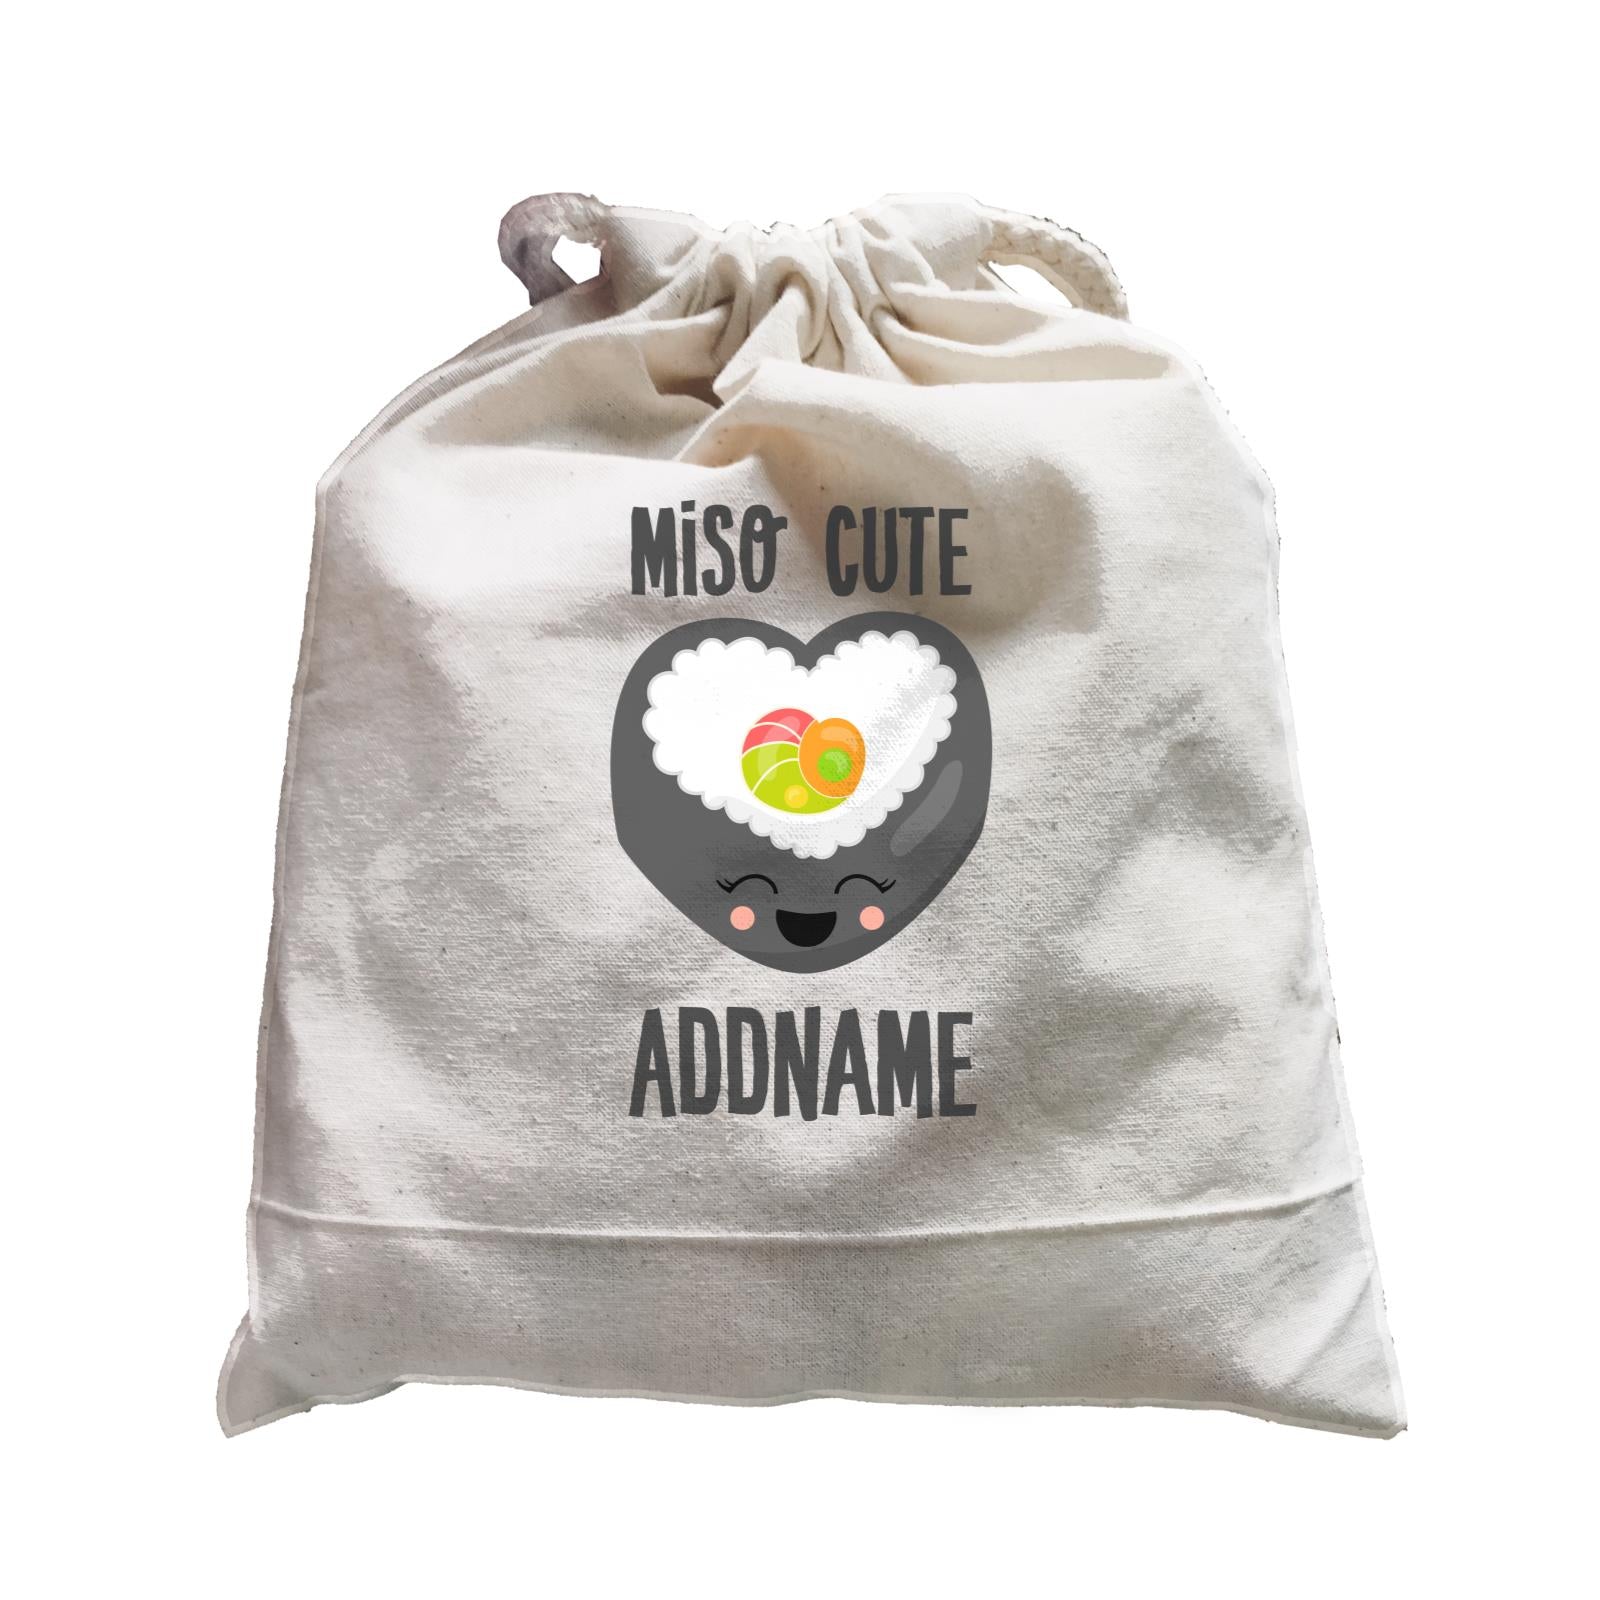 Miso Cute Sushi Heart Roll Addname Satchel